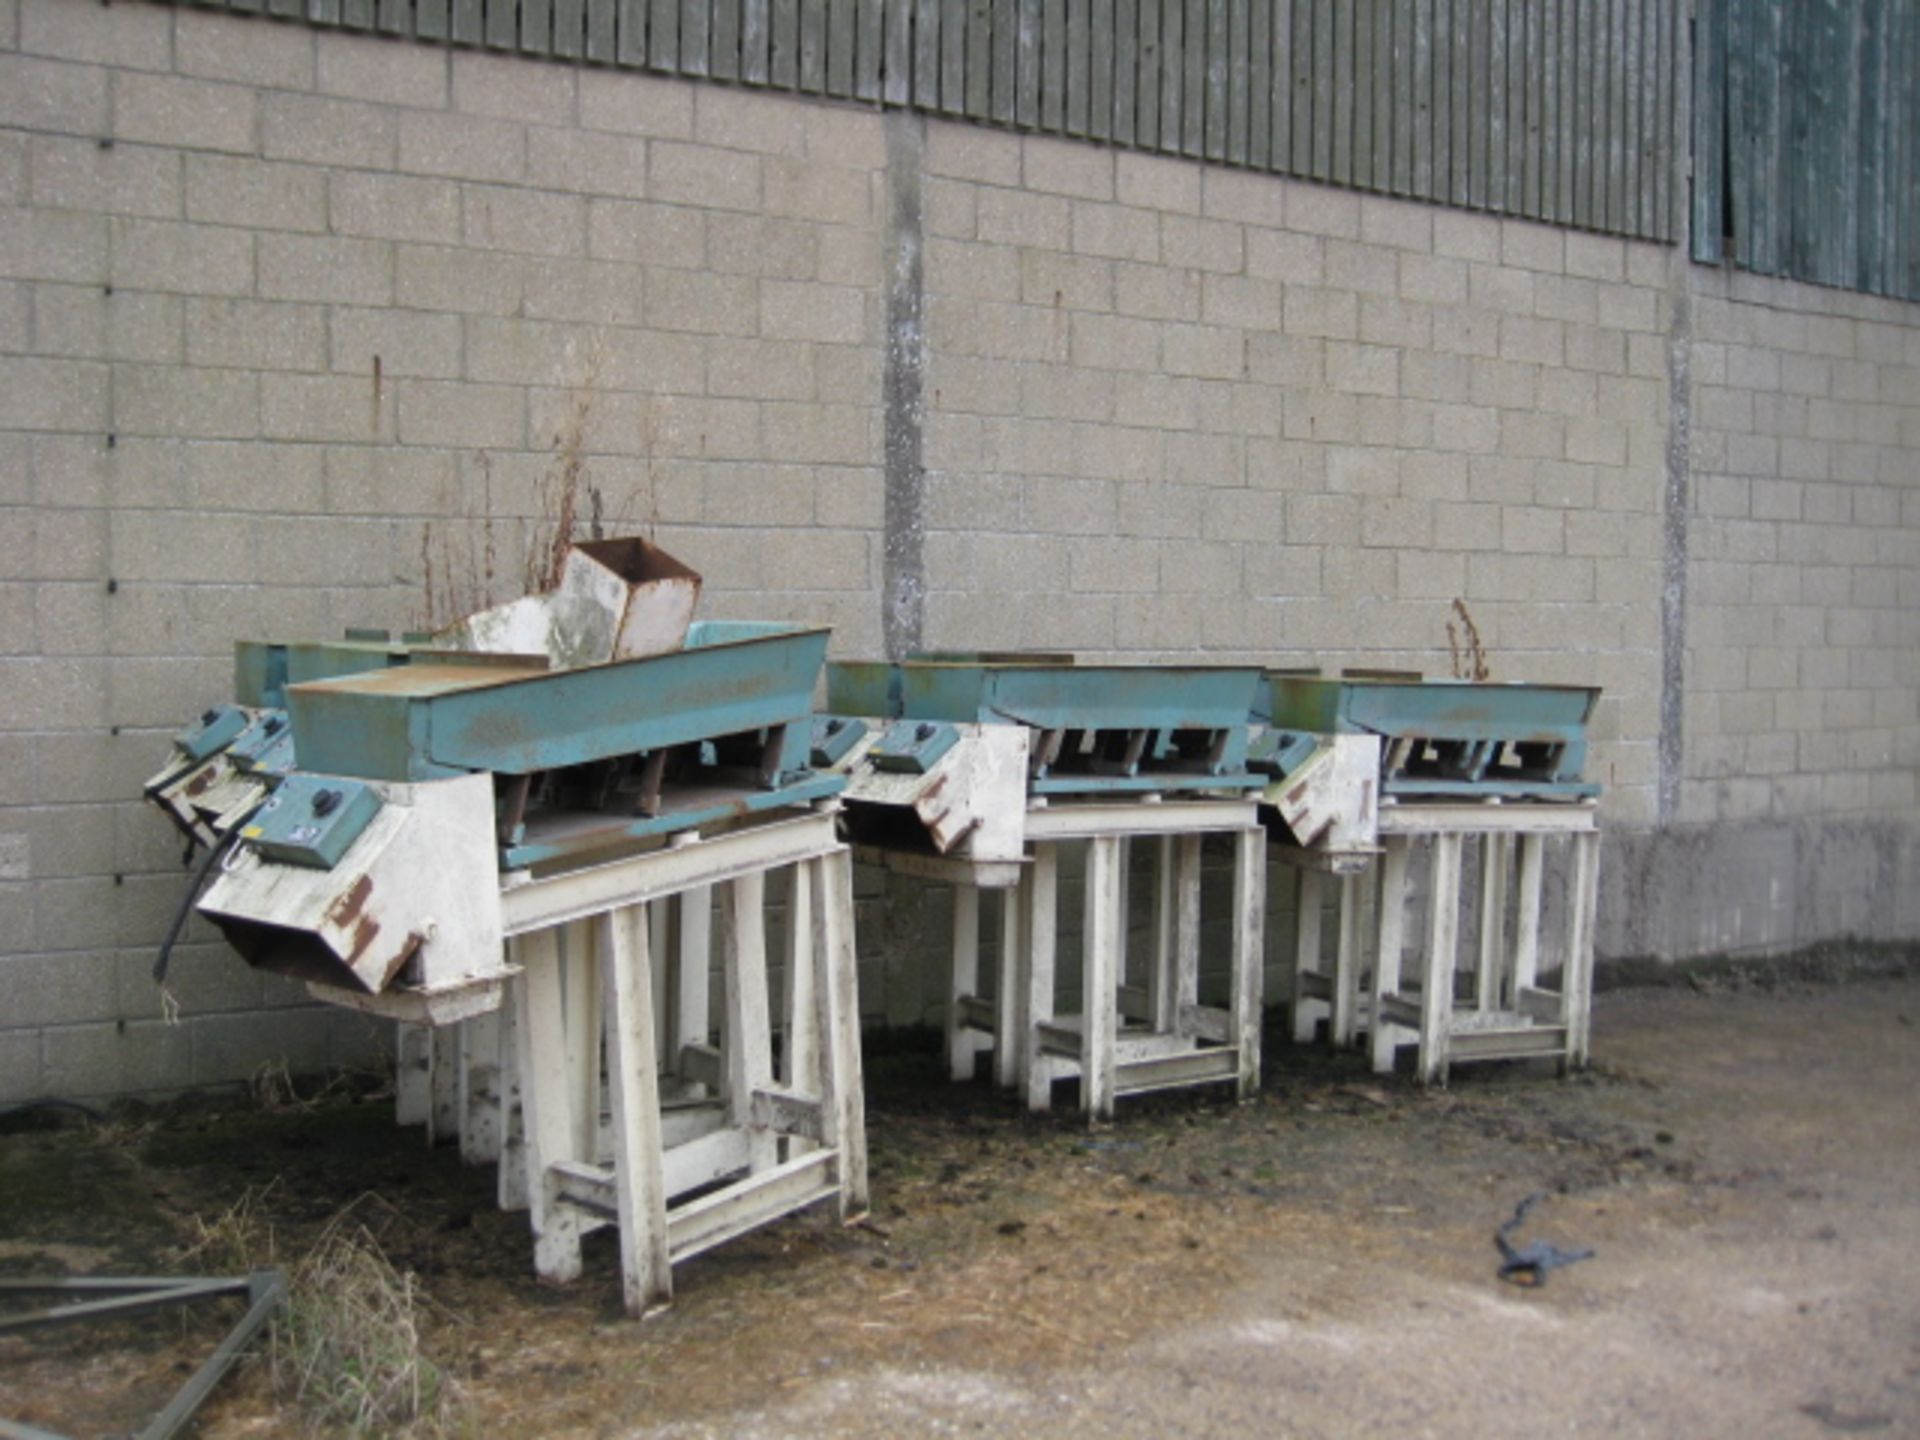 Tray Feeder - Steel hopper 1.8M x 1.8M x 4.0M high overall with supporting legs and board top. The - Image 4 of 6